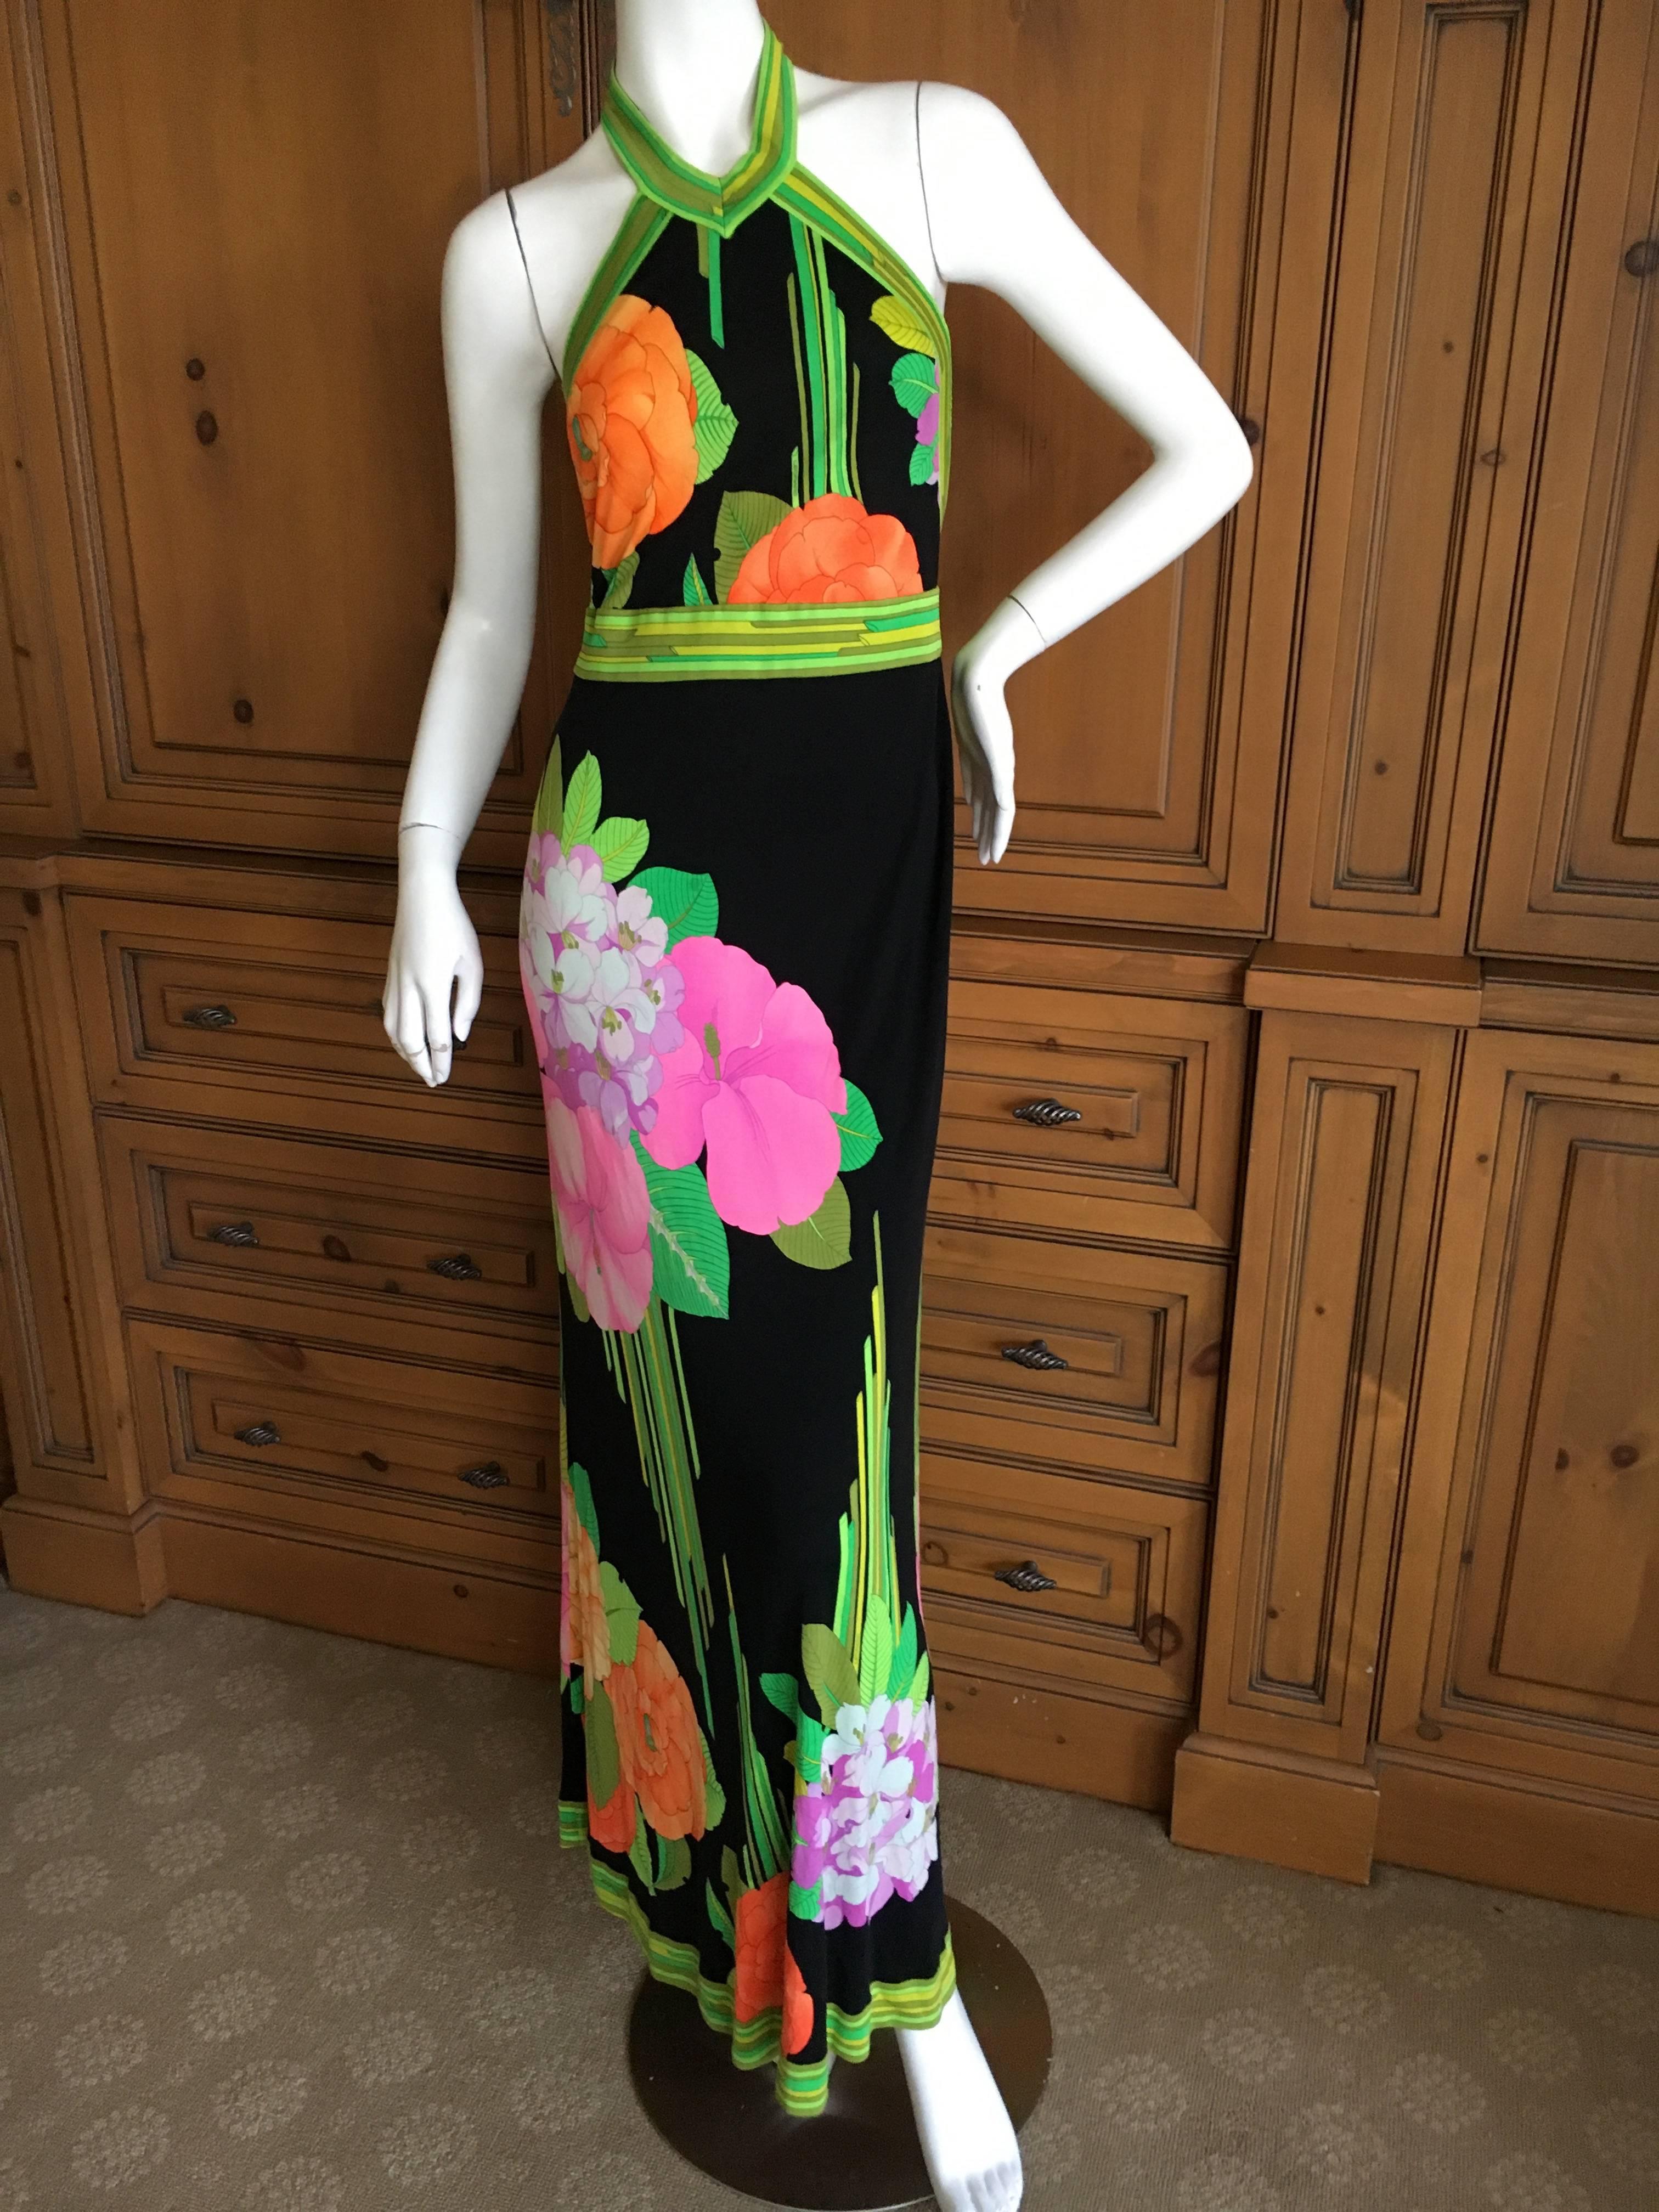 Leonard Paris for Bergdorf Goodman 1970's Silk Halter Dress.
Leonard , Paris was a contemporary of Pucci, using silk jersey printed in their signature florals, Leonard was as expensive, if not more, than Pucci.
Dated 1976 on the Bergdorf label.
Bust